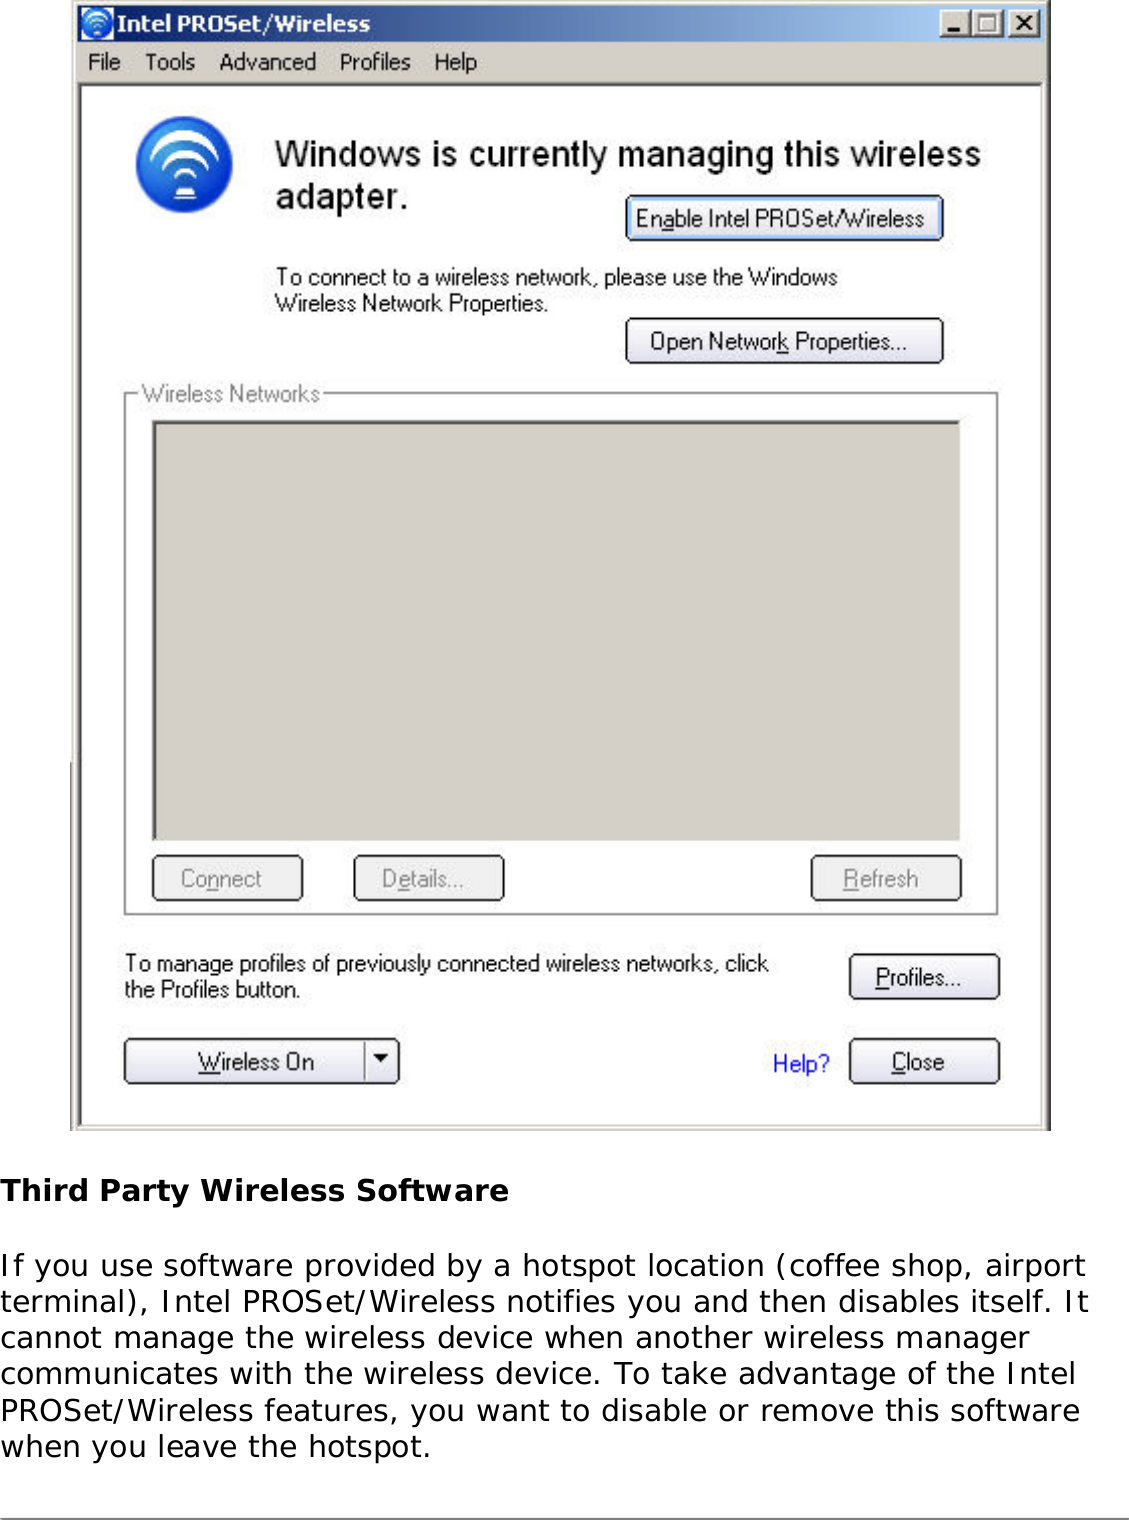  Third Party Wireless SoftwareIf you use software provided by a hotspot location (coffee shop, airport terminal), Intel PROSet/Wireless notifies you and then disables itself. It cannot manage the wireless device when another wireless manager communicates with the wireless device. To take advantage of the Intel PROSet/Wireless features, you want to disable or remove this software when you leave the hotspot. 